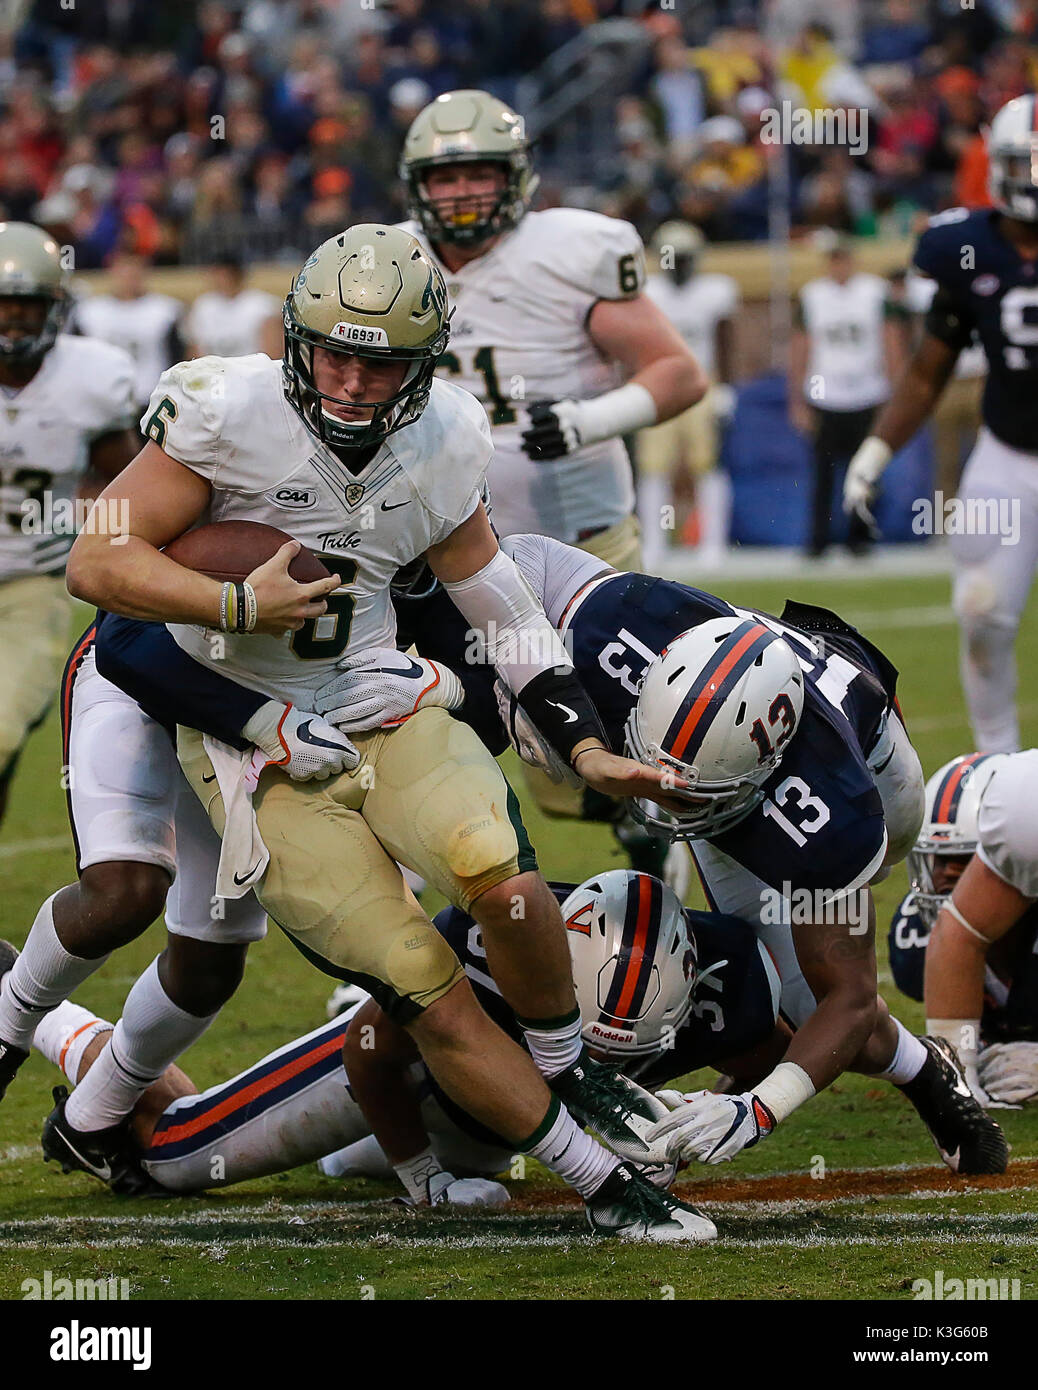 Charlottesville, Virginia, USA. 2nd Sep, 2017. William & Mary Tribe QB/P #6 Tommy McKee is dragged down during NCAA football game between the University of Virginia Cavaliers and the William & Mary Tribe at Scott Stadium in Charlottesville, Virginia. Justin Cooper/CSM/Alamy Live News Stock Photo